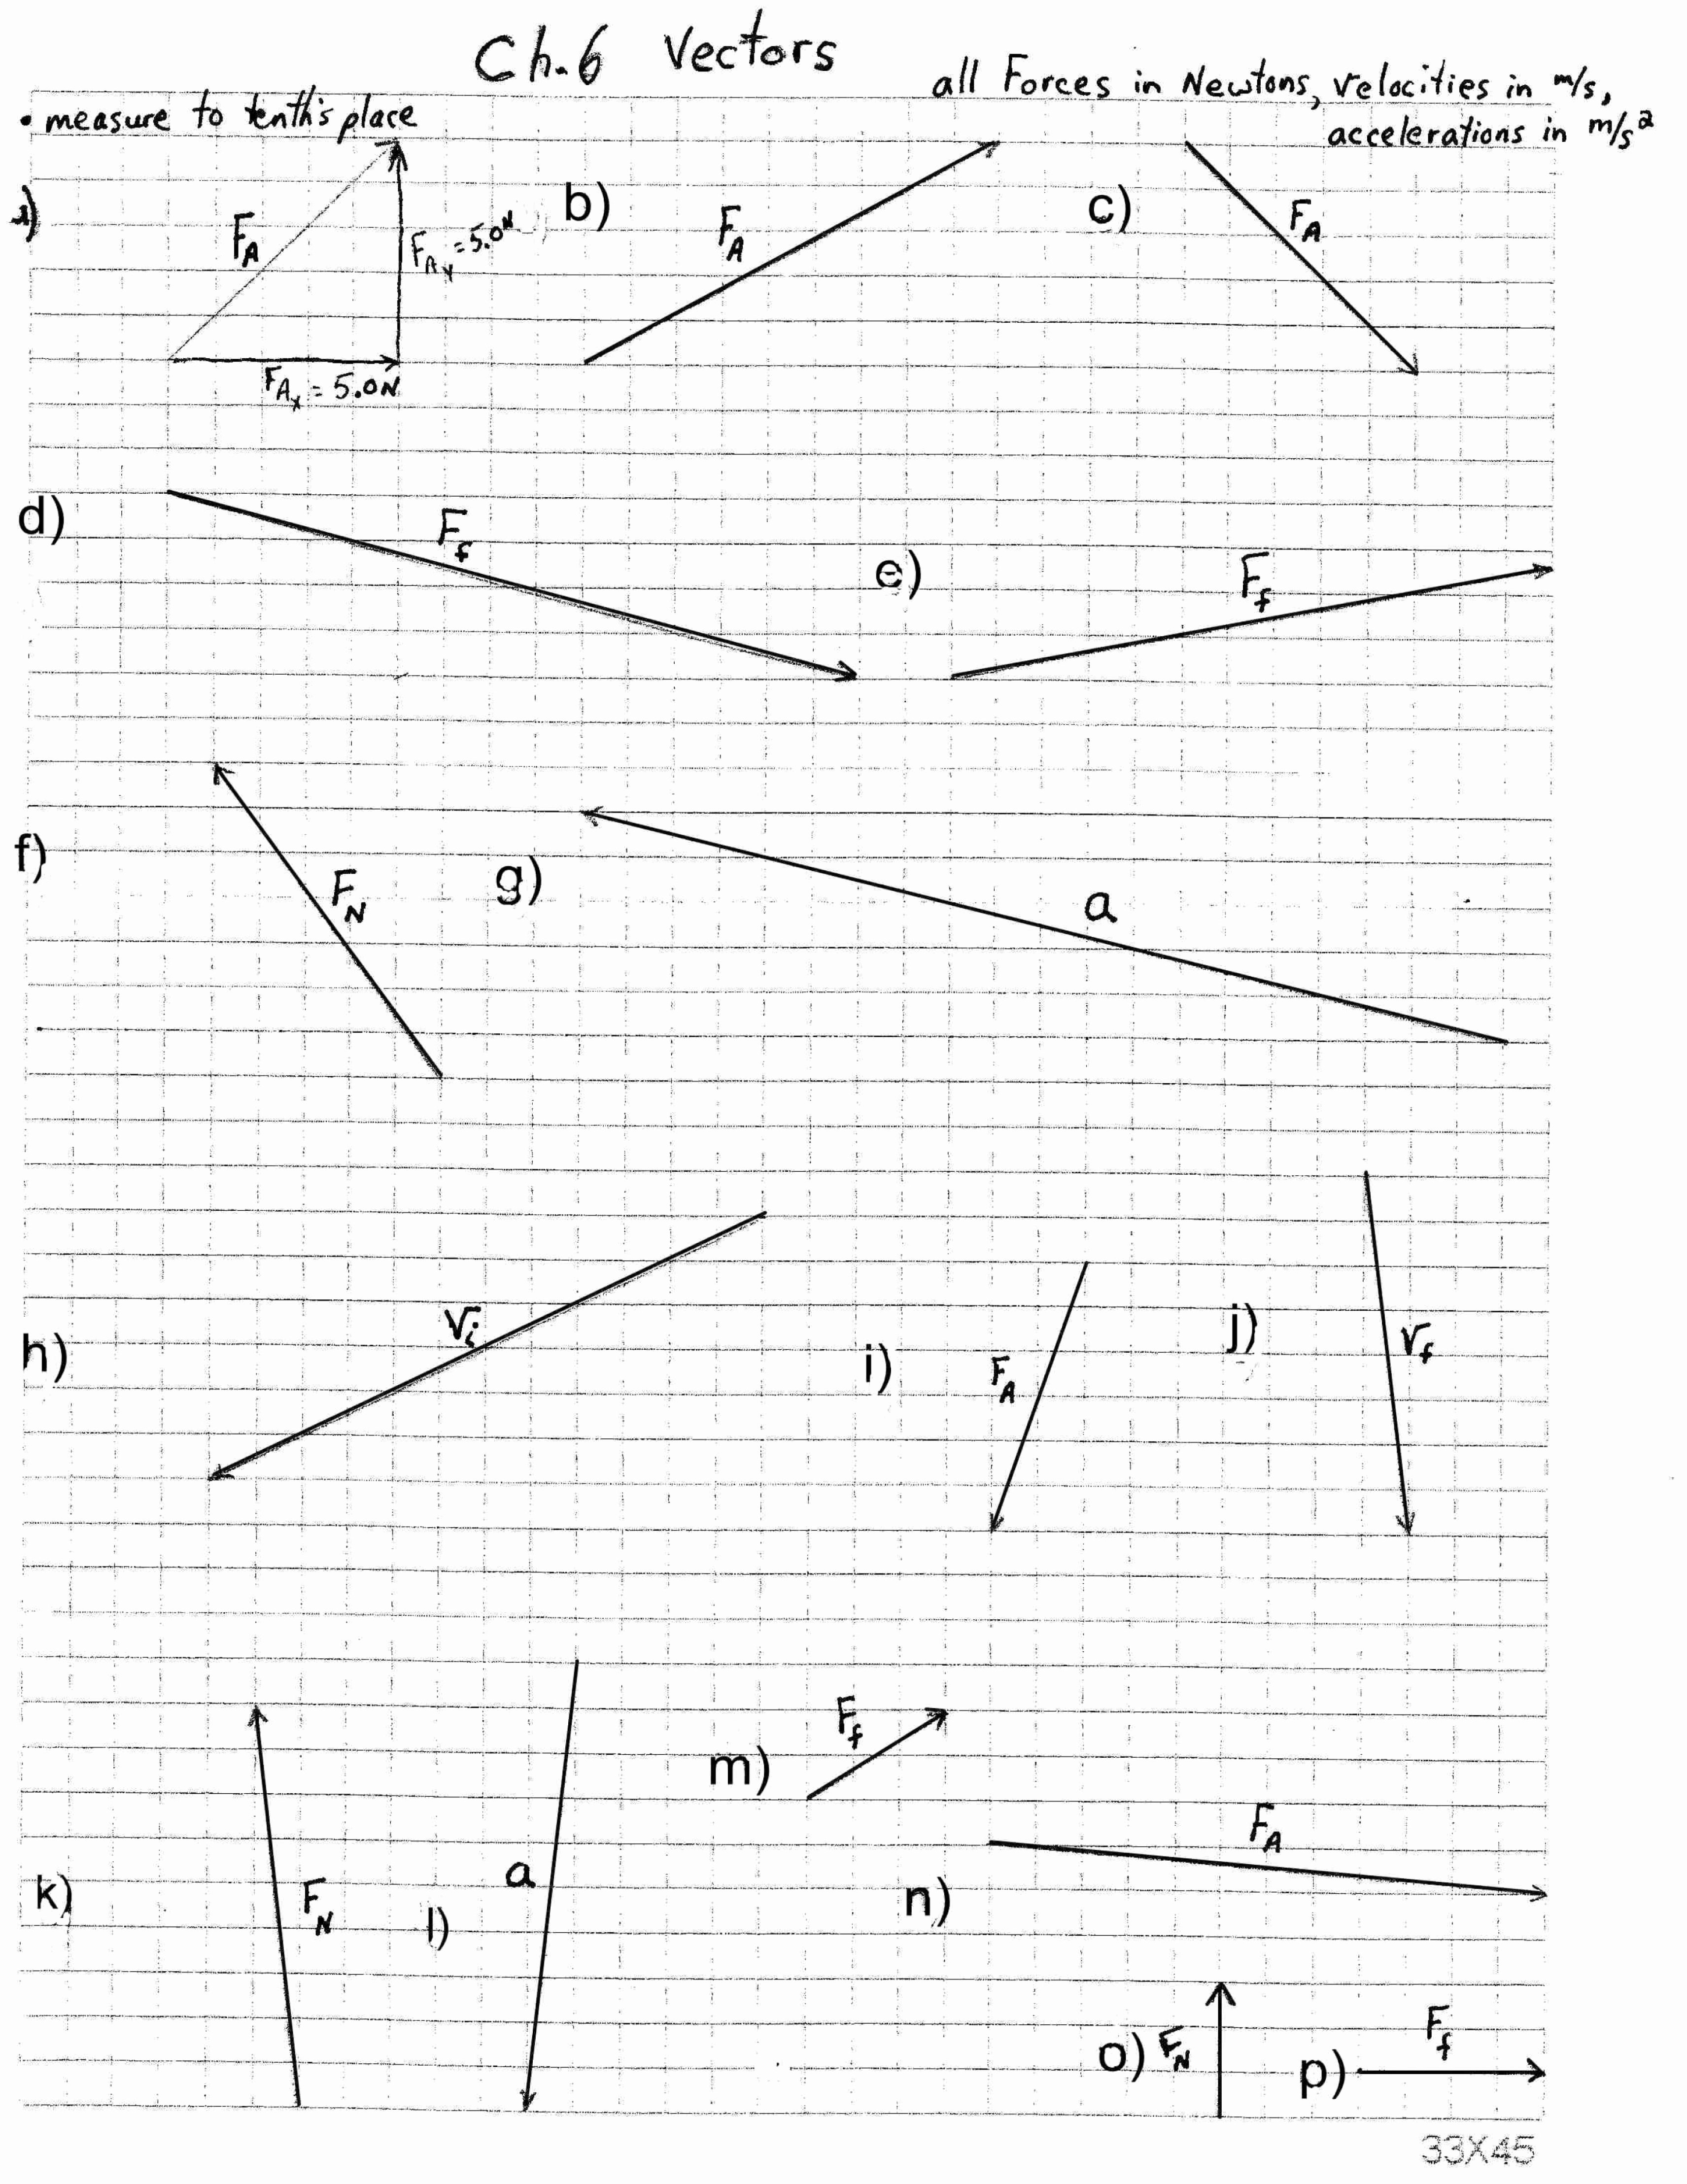 Vector Addition Worksheet with Answers Luxury Physics Vector Worksheet Answer Key No 2